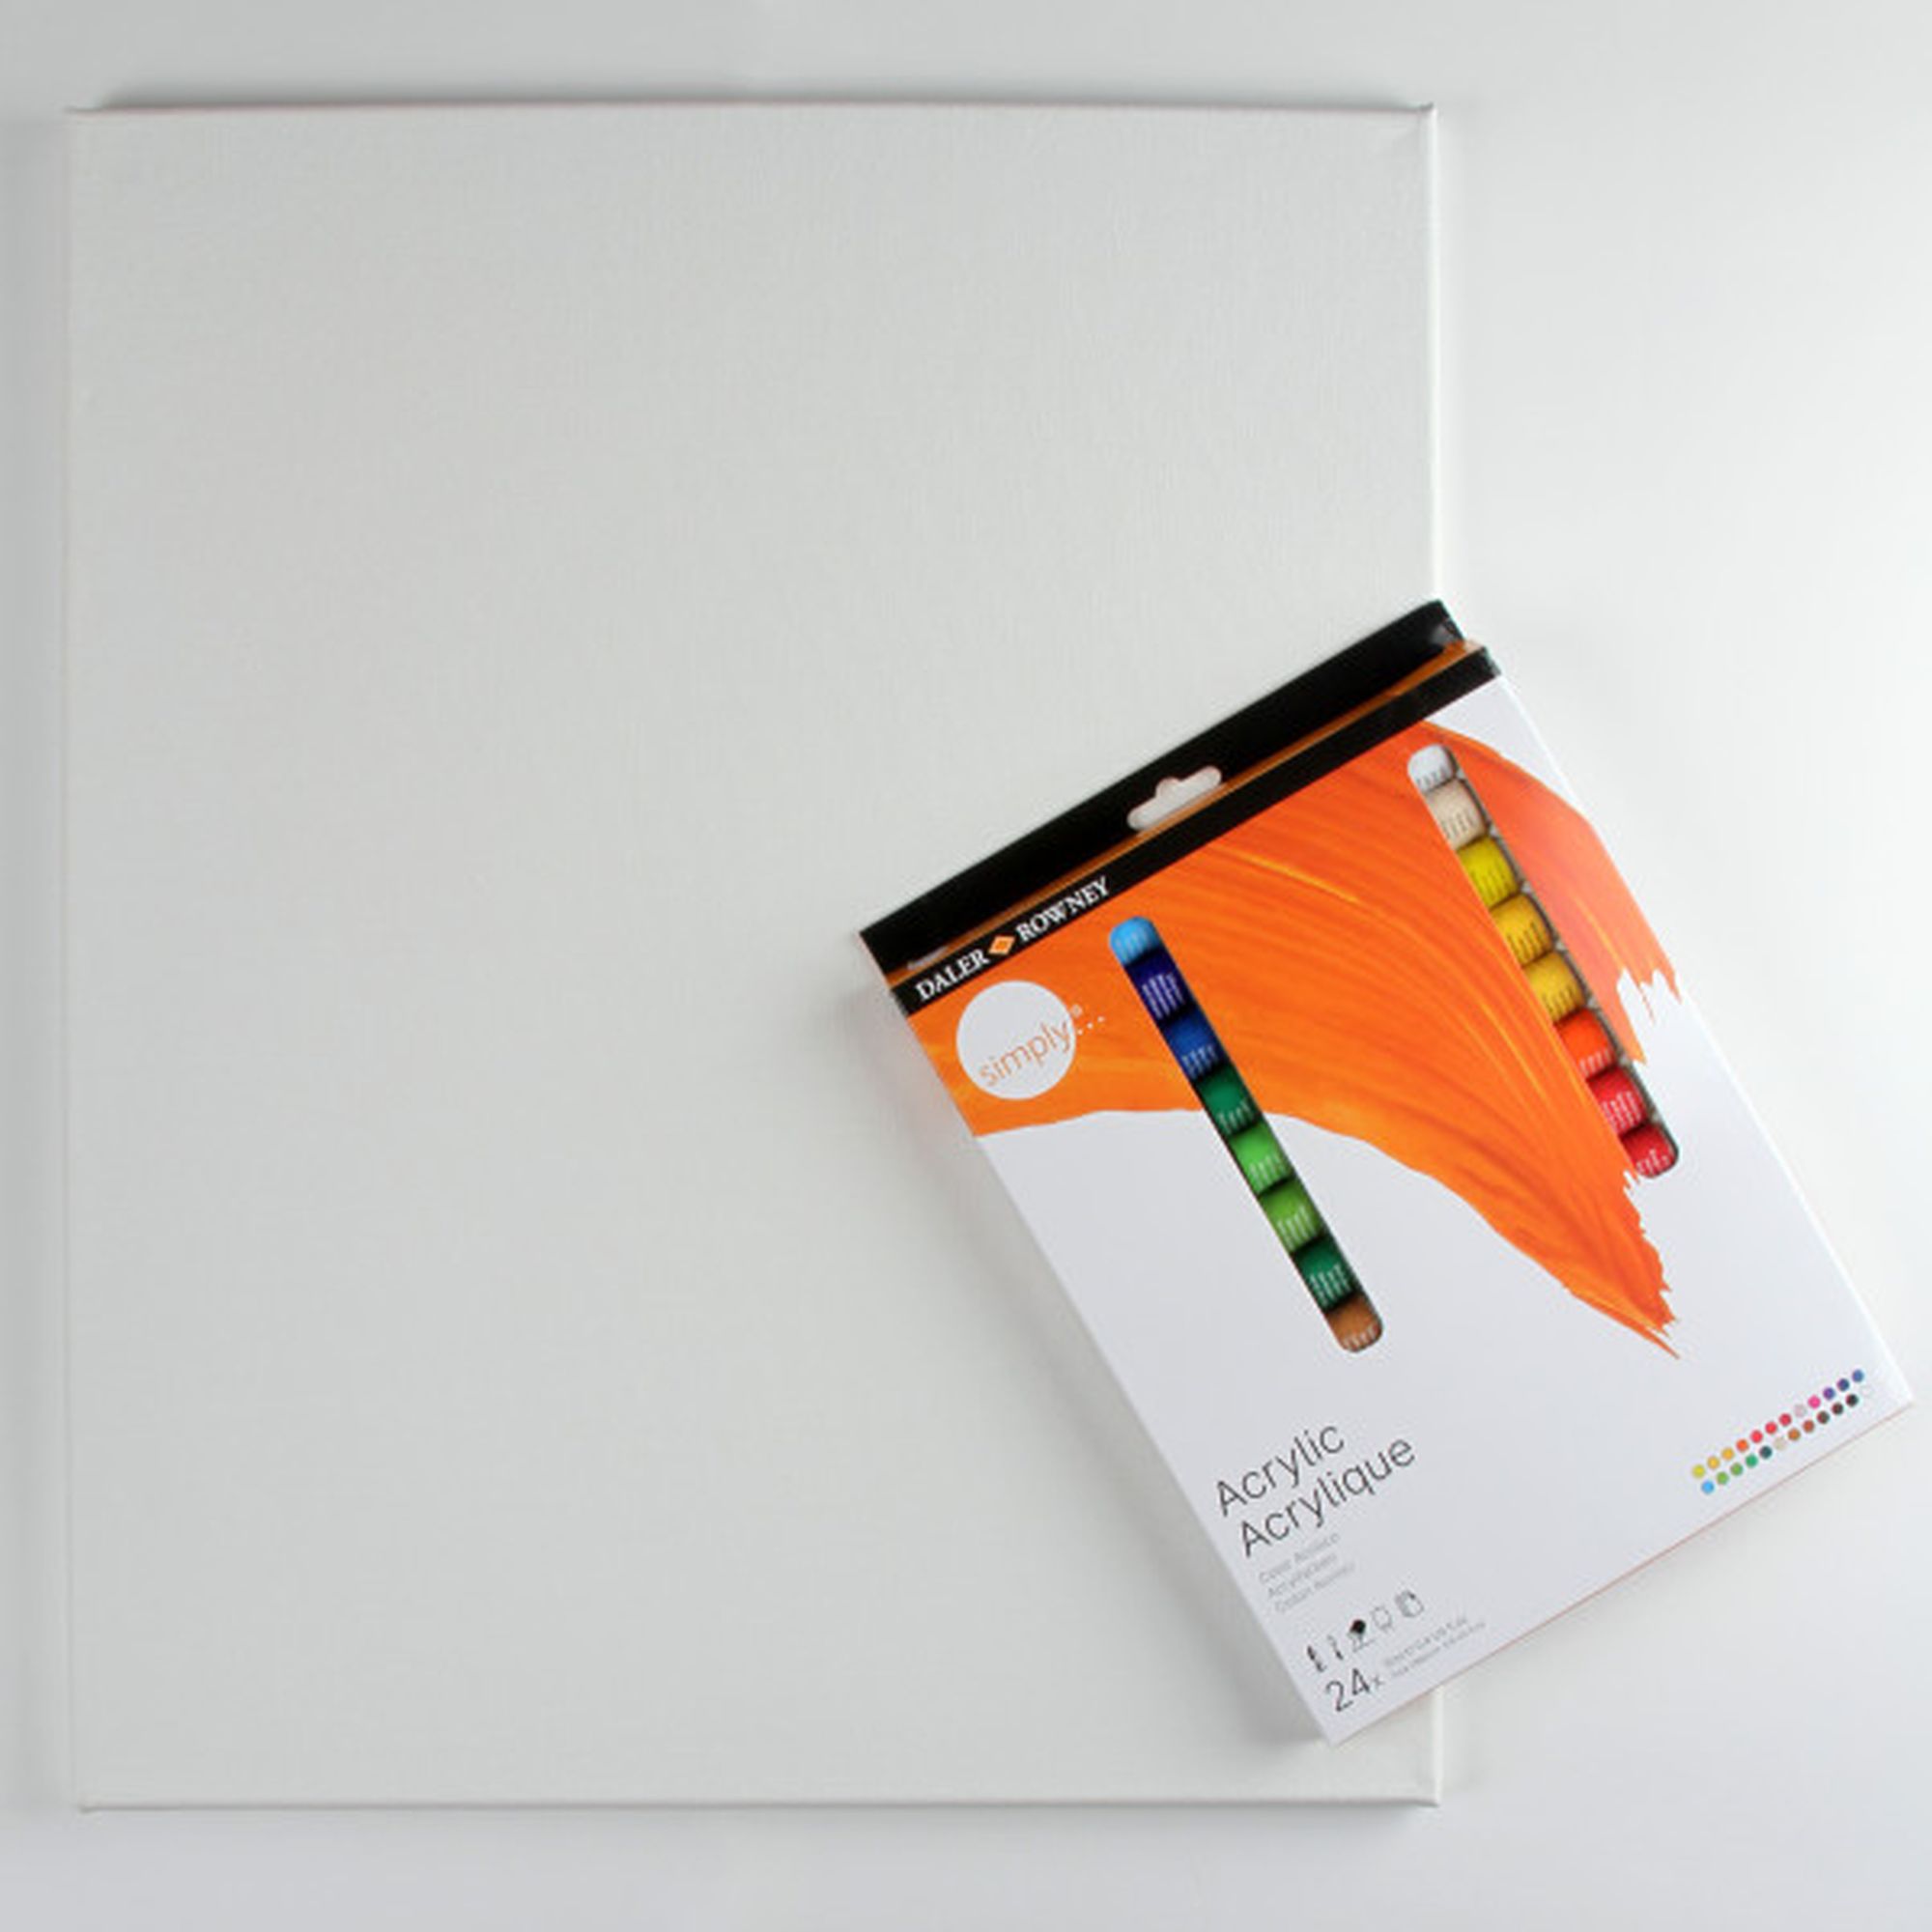 Daler-Rowney Simply Canvas, White Stretched, 16x20 inch, 2 Piece - Teens, Students, Artists, Kids - image 2 of 6